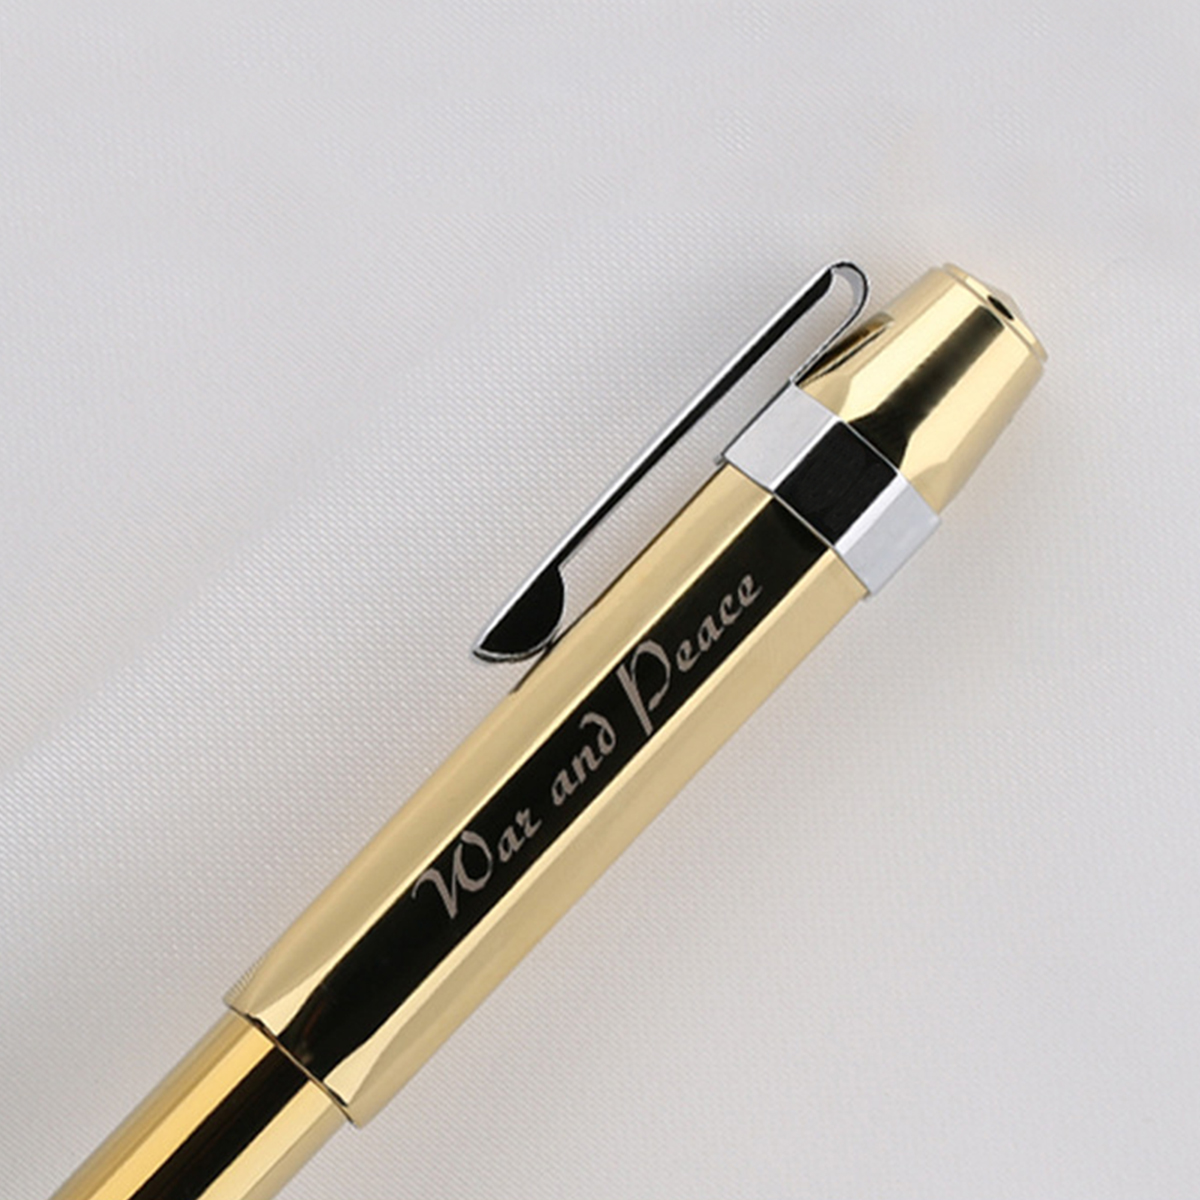 Metal-Fountain-Pen-Short-Smooth-Calligraphy-Writing-Pen-Ink-Gel-Pen-with-Iron-Case-Gift-for-Students-1755553-6